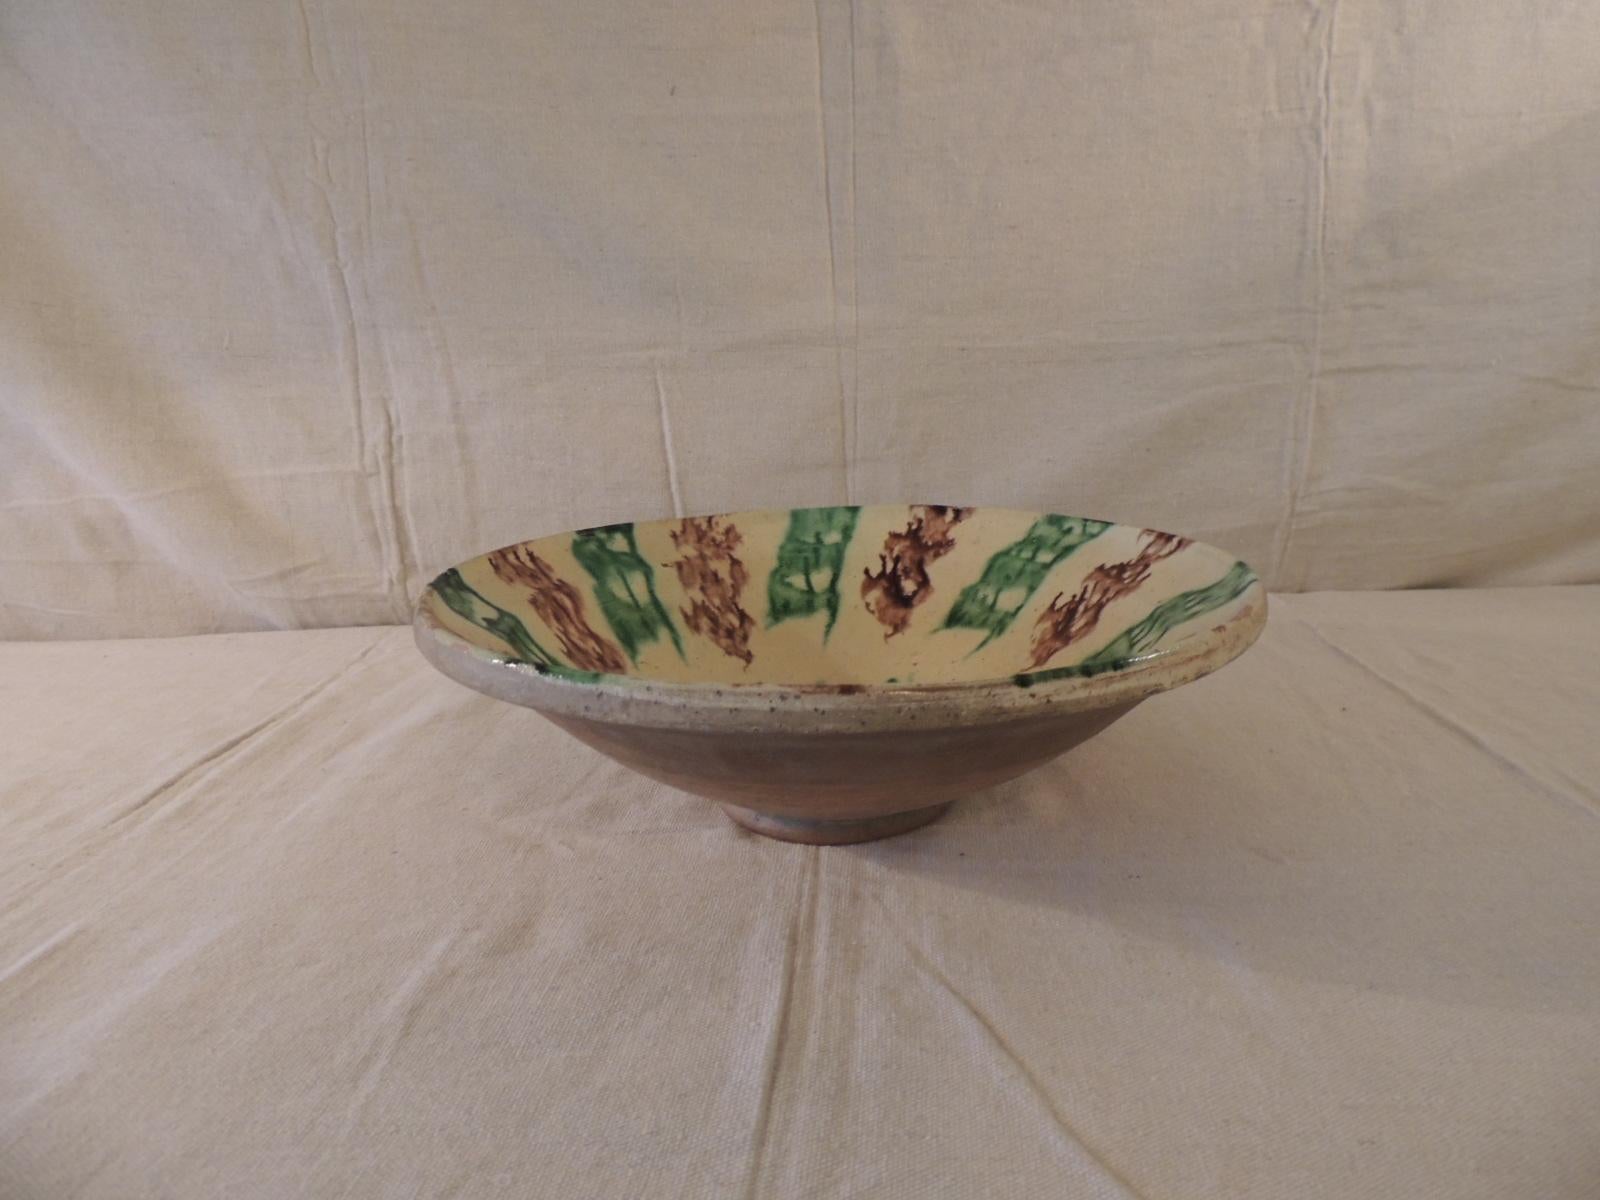 Antique green and brown glazed terracotta bowl
Size: 12.5